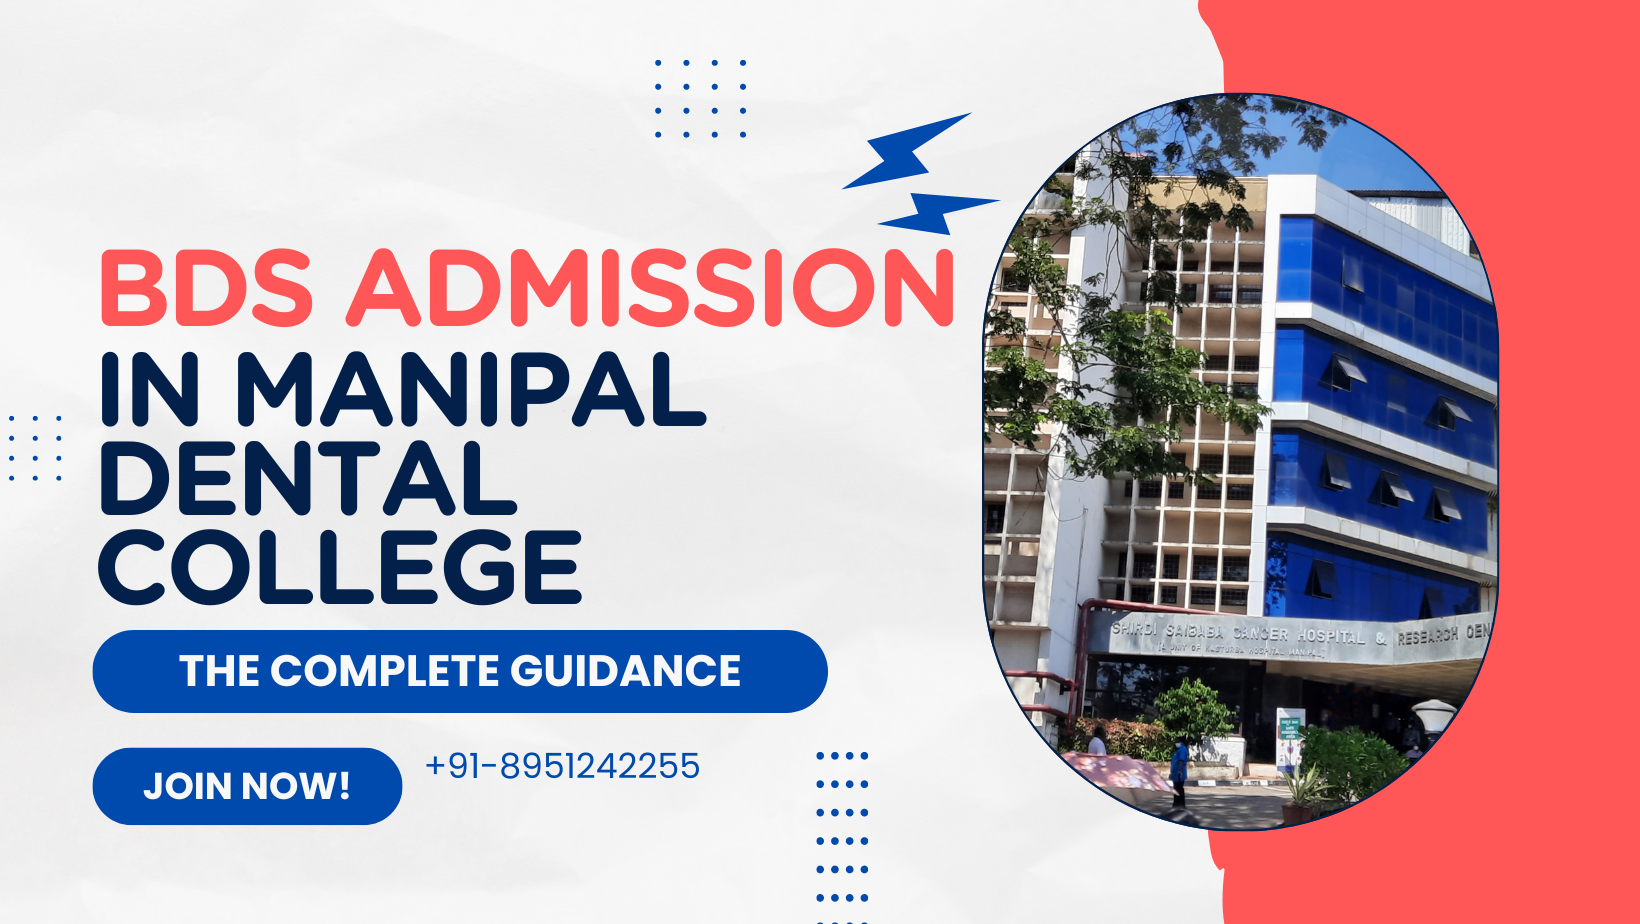 Direct admission in Manipal Dental College